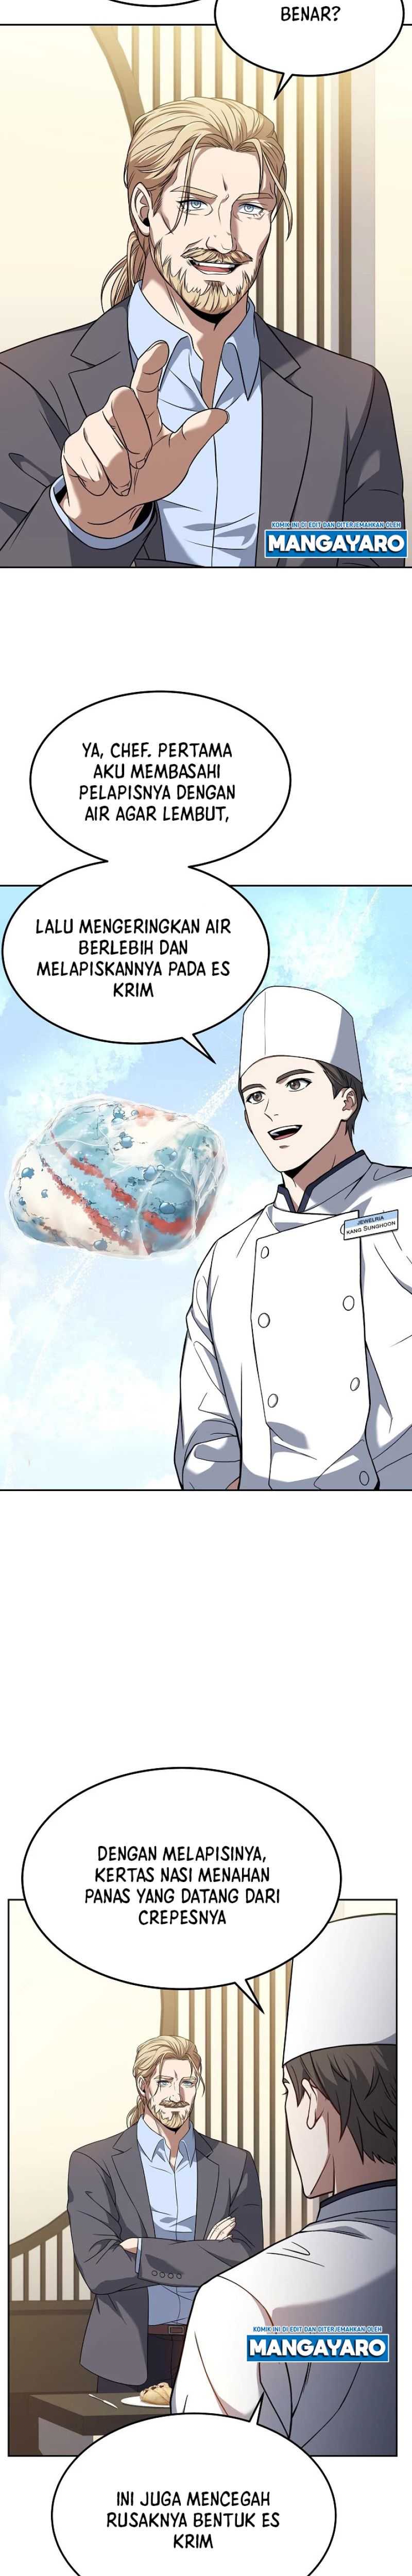 Youngest Chef From the 3rd Rate Hotel Chapter 46